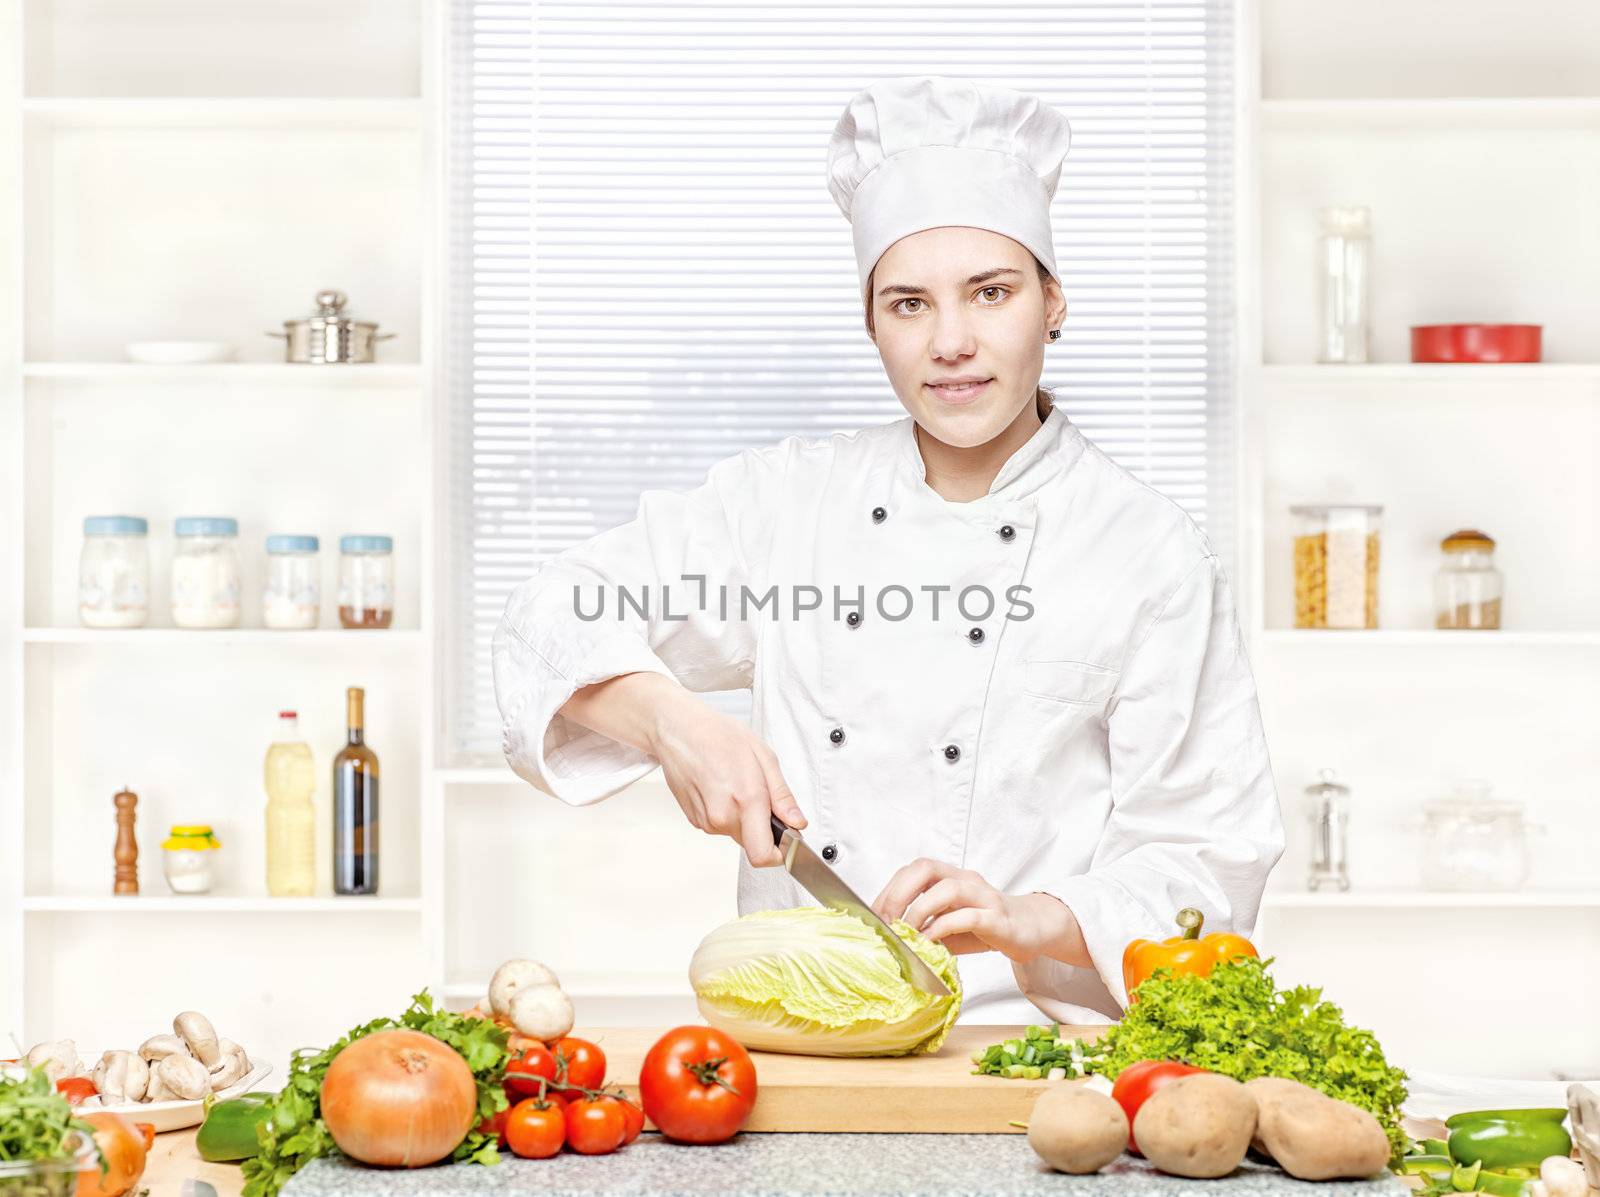 Young female chef cutting cabbage on the cutting board in kitchen